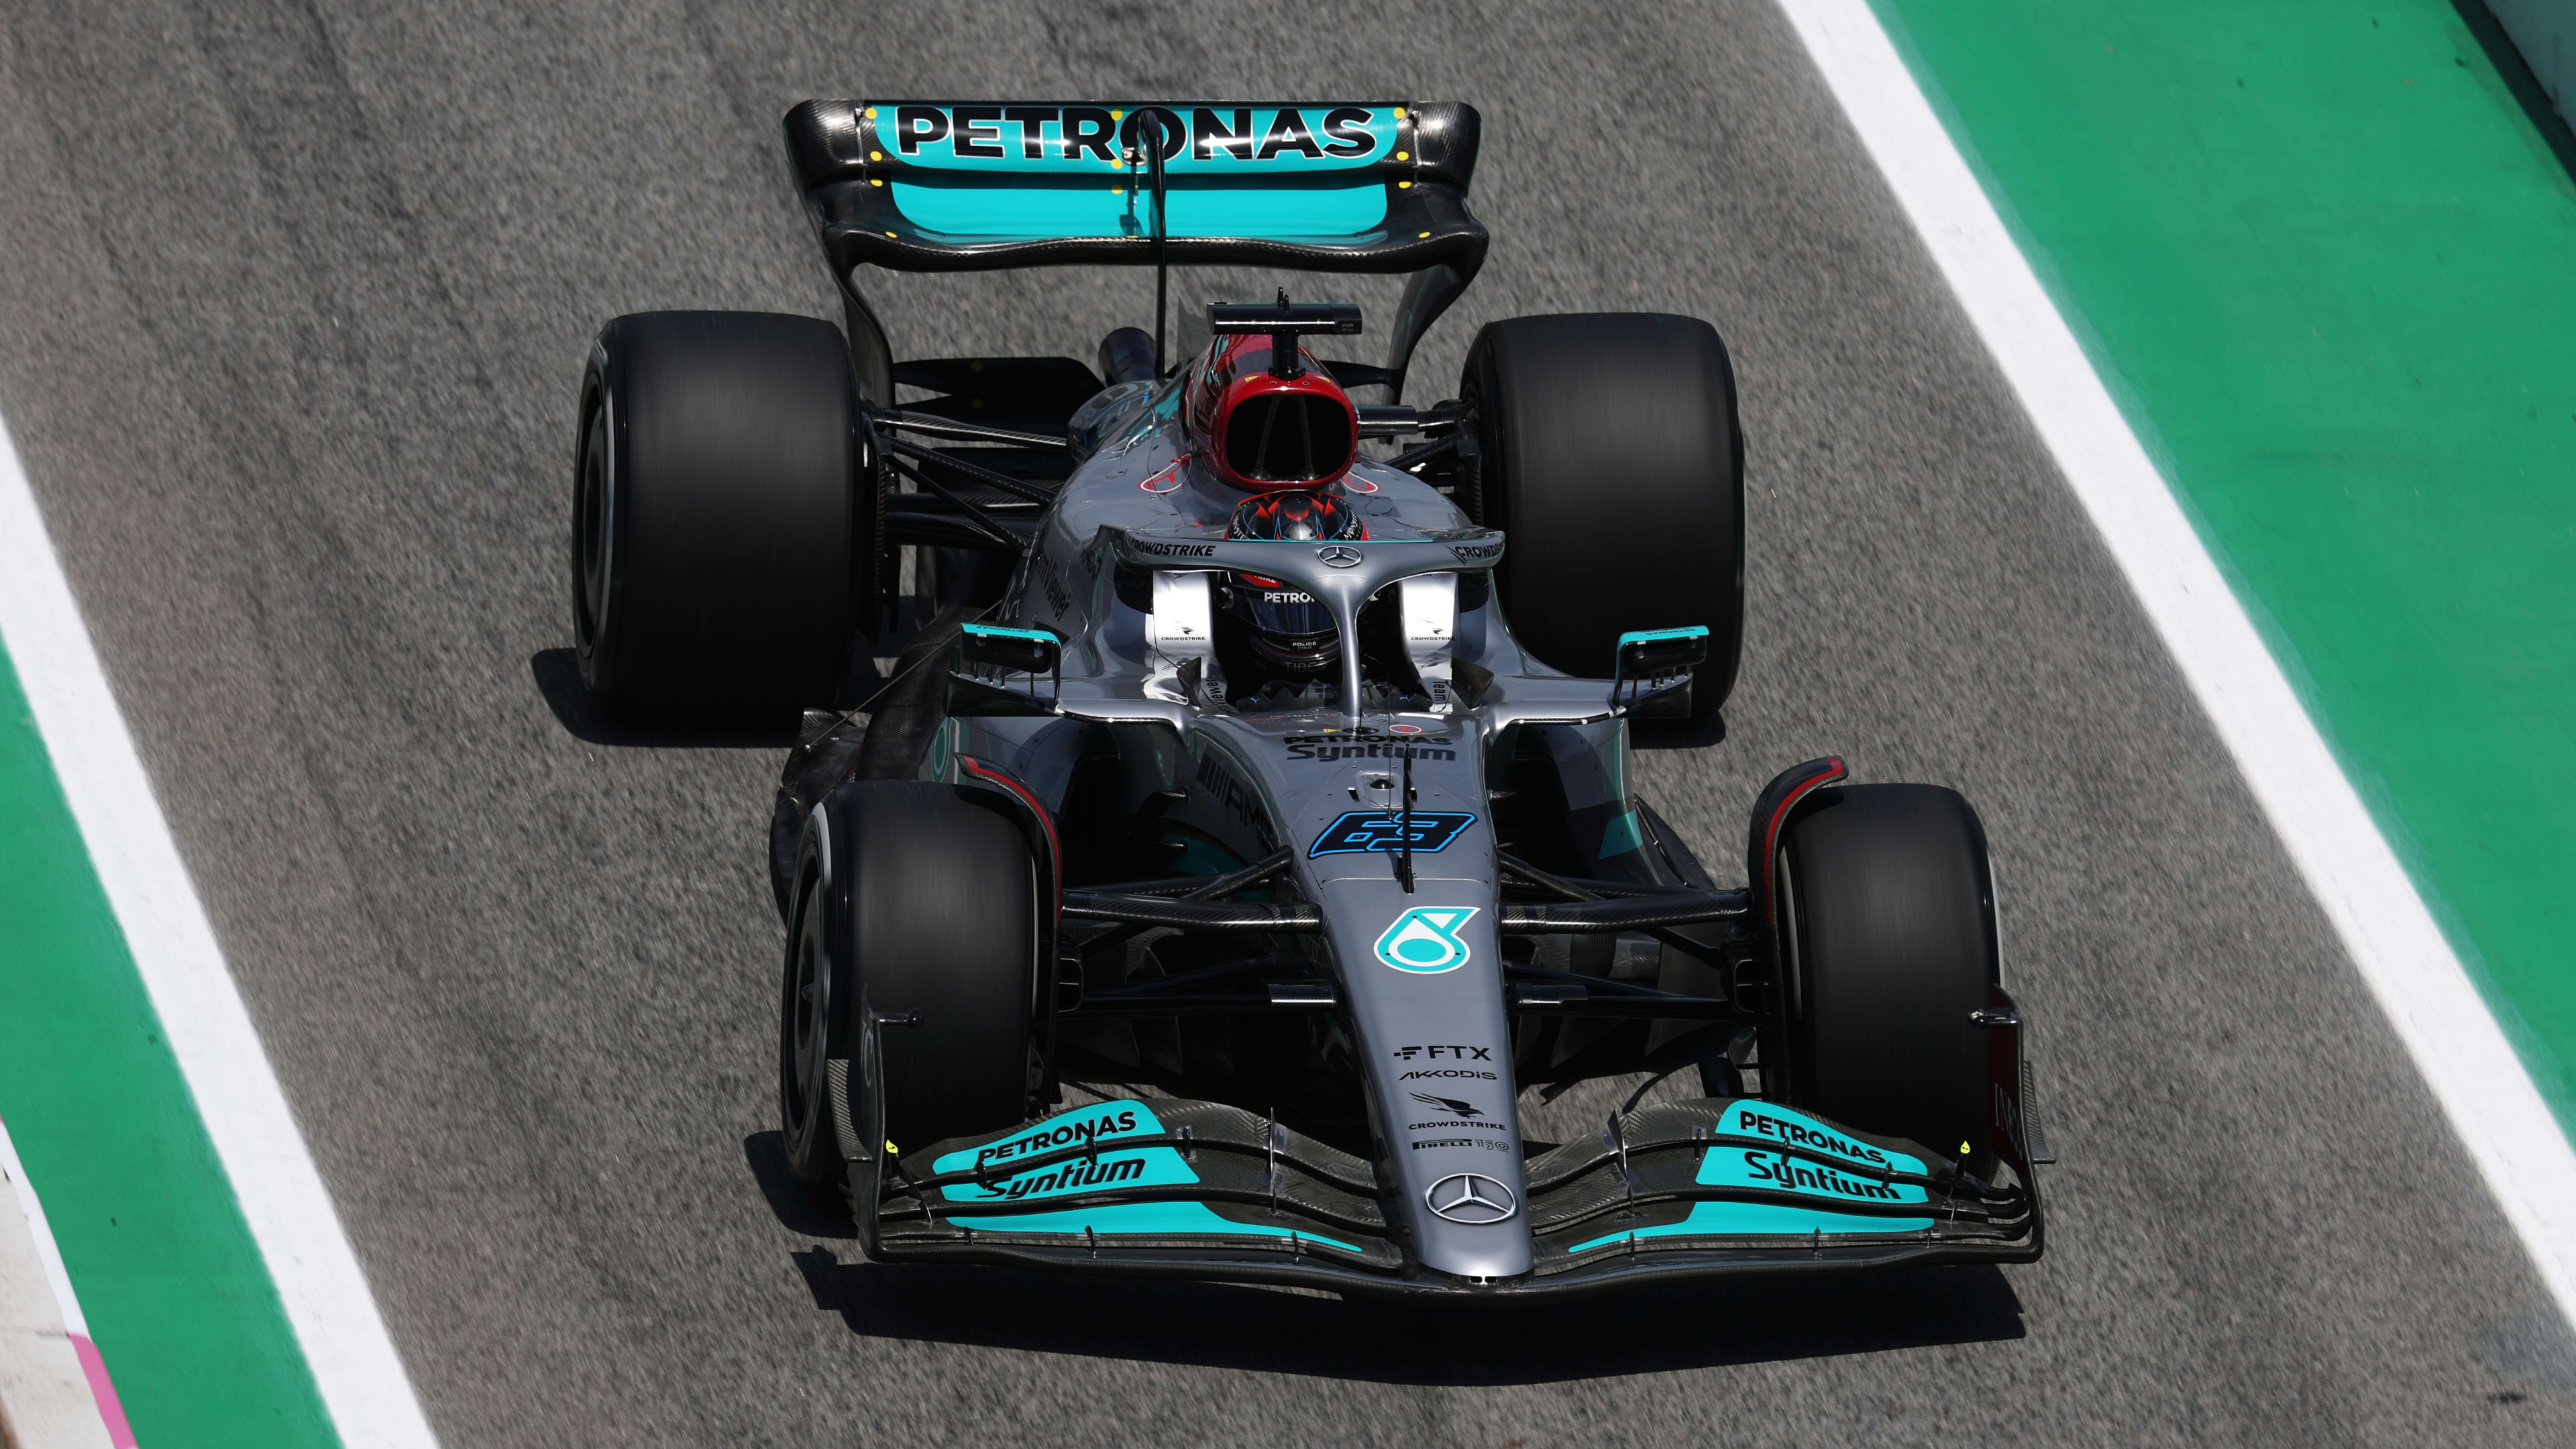 Mercedes get back to F1 action as Russell and Hamilton hit the track at Paul Ricard